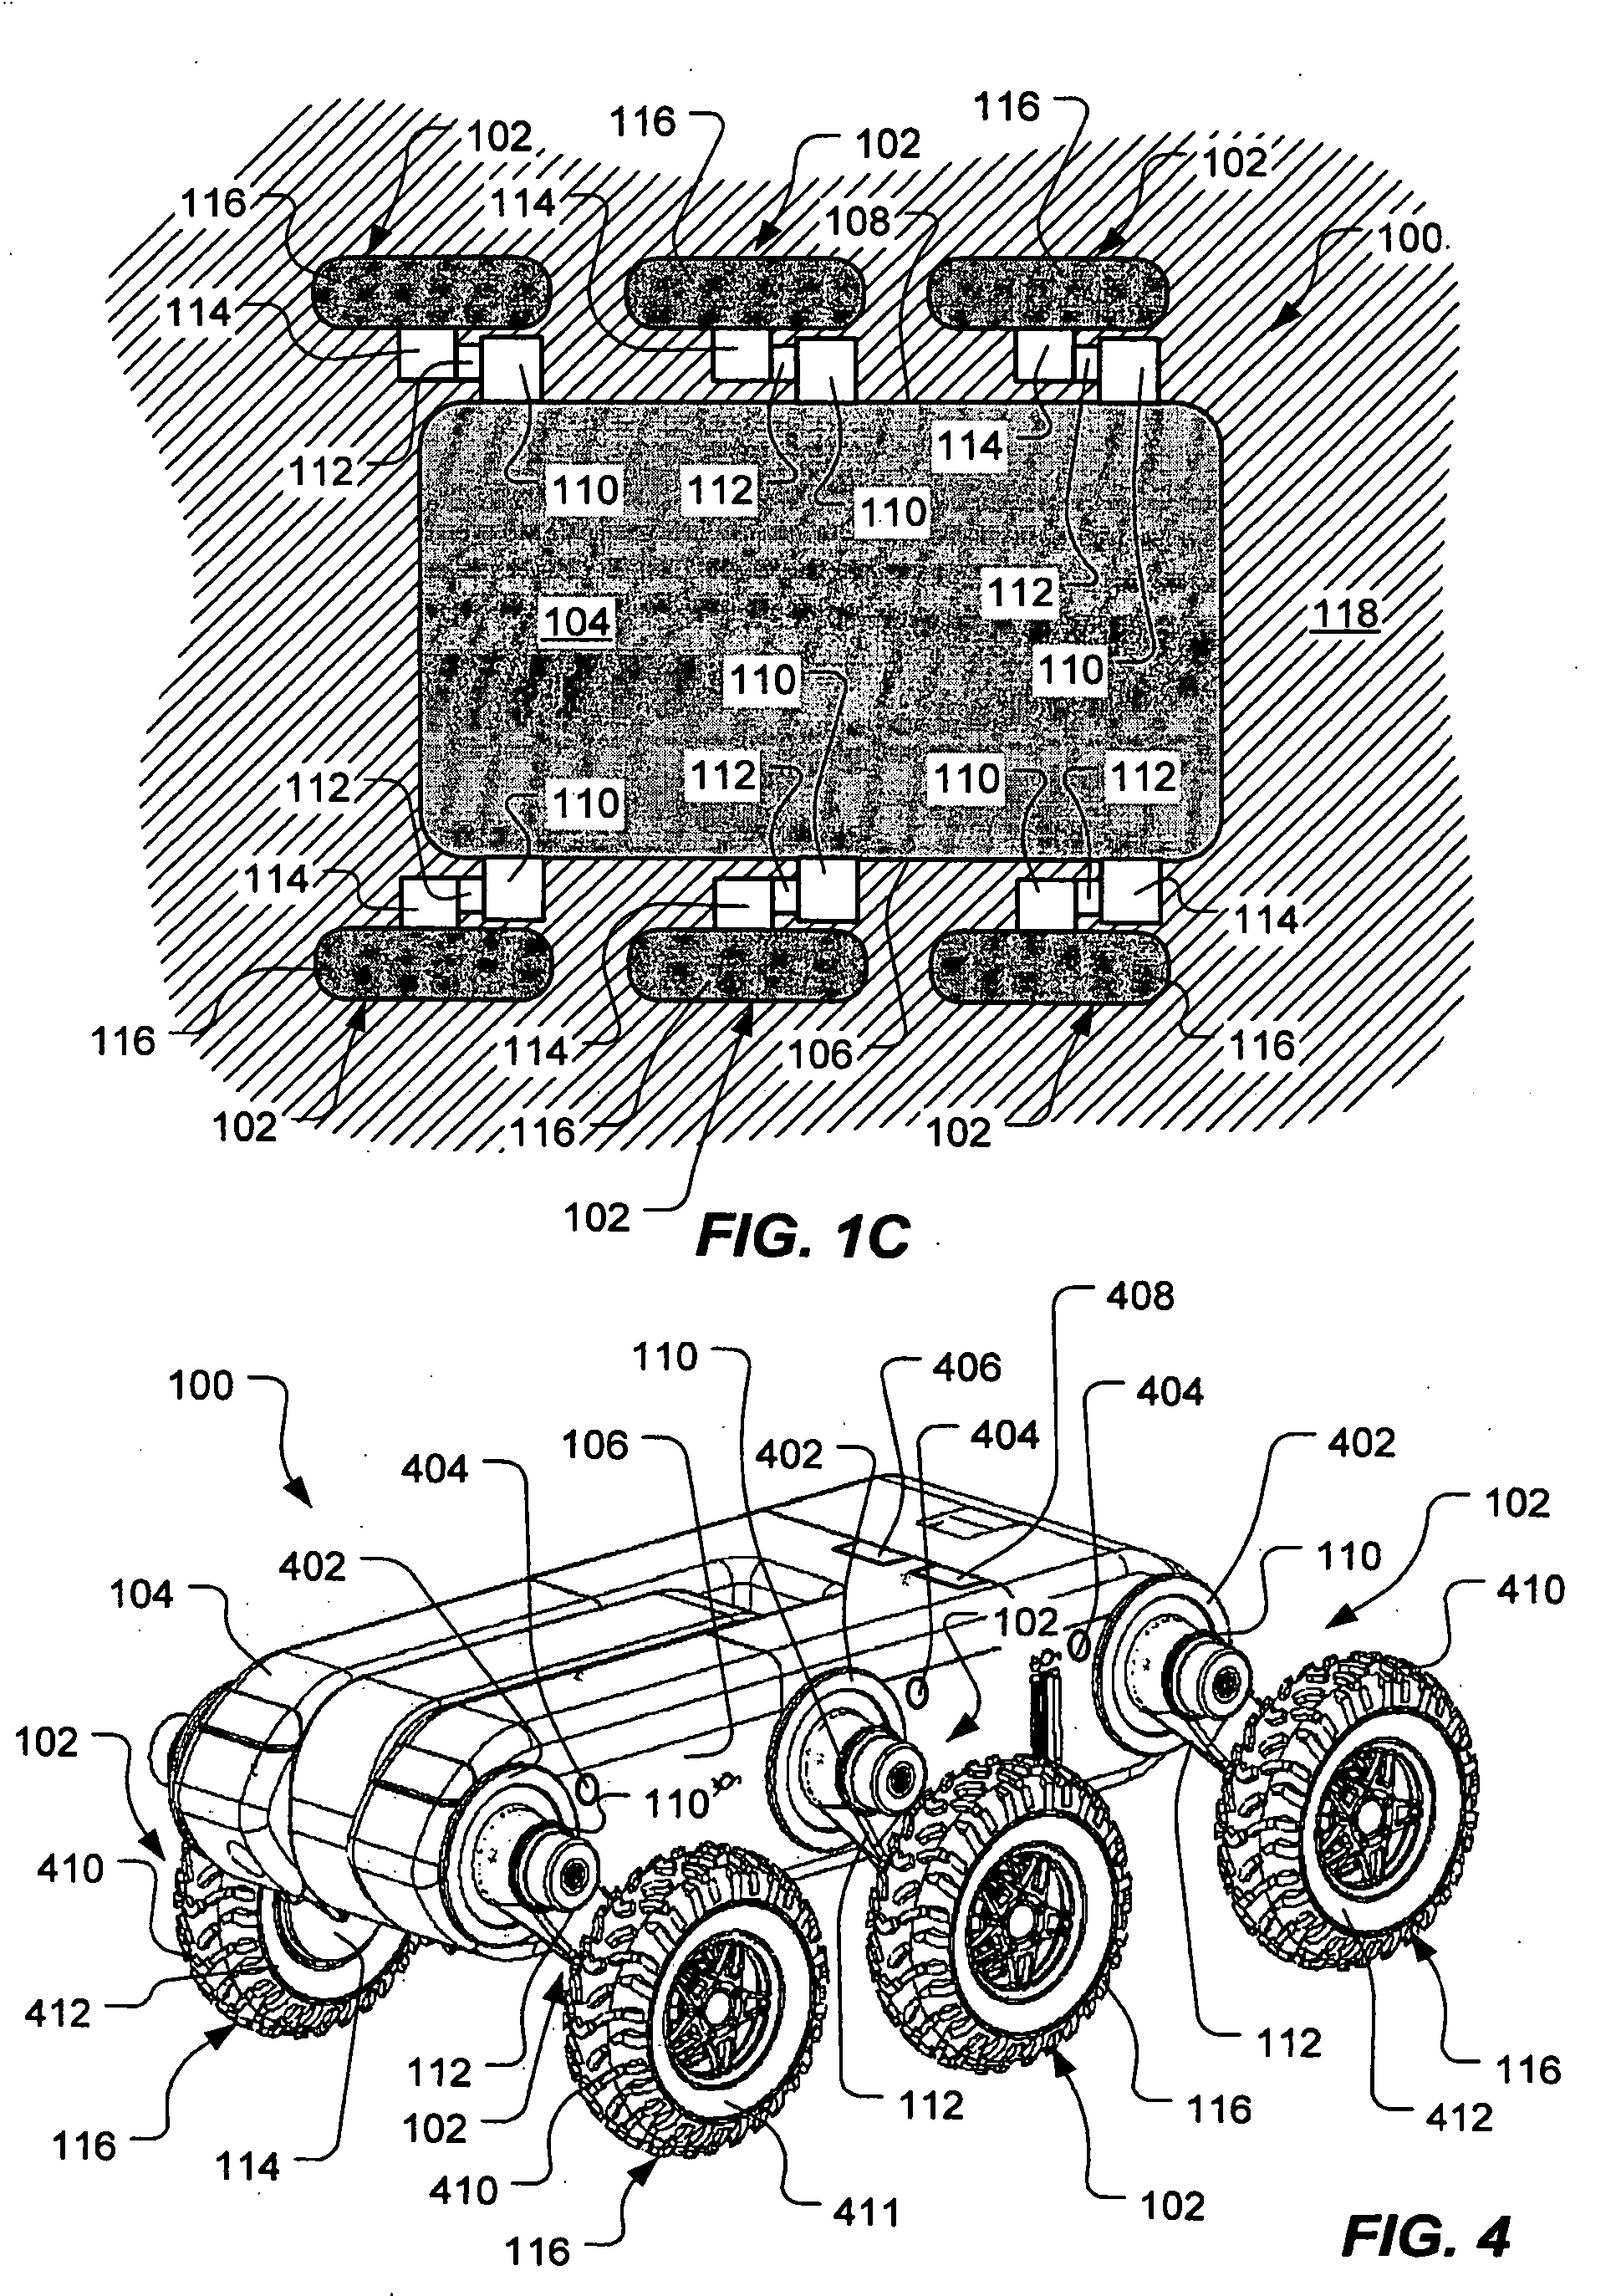 System and method for dynamically controlling the stability of an articulated vehicle